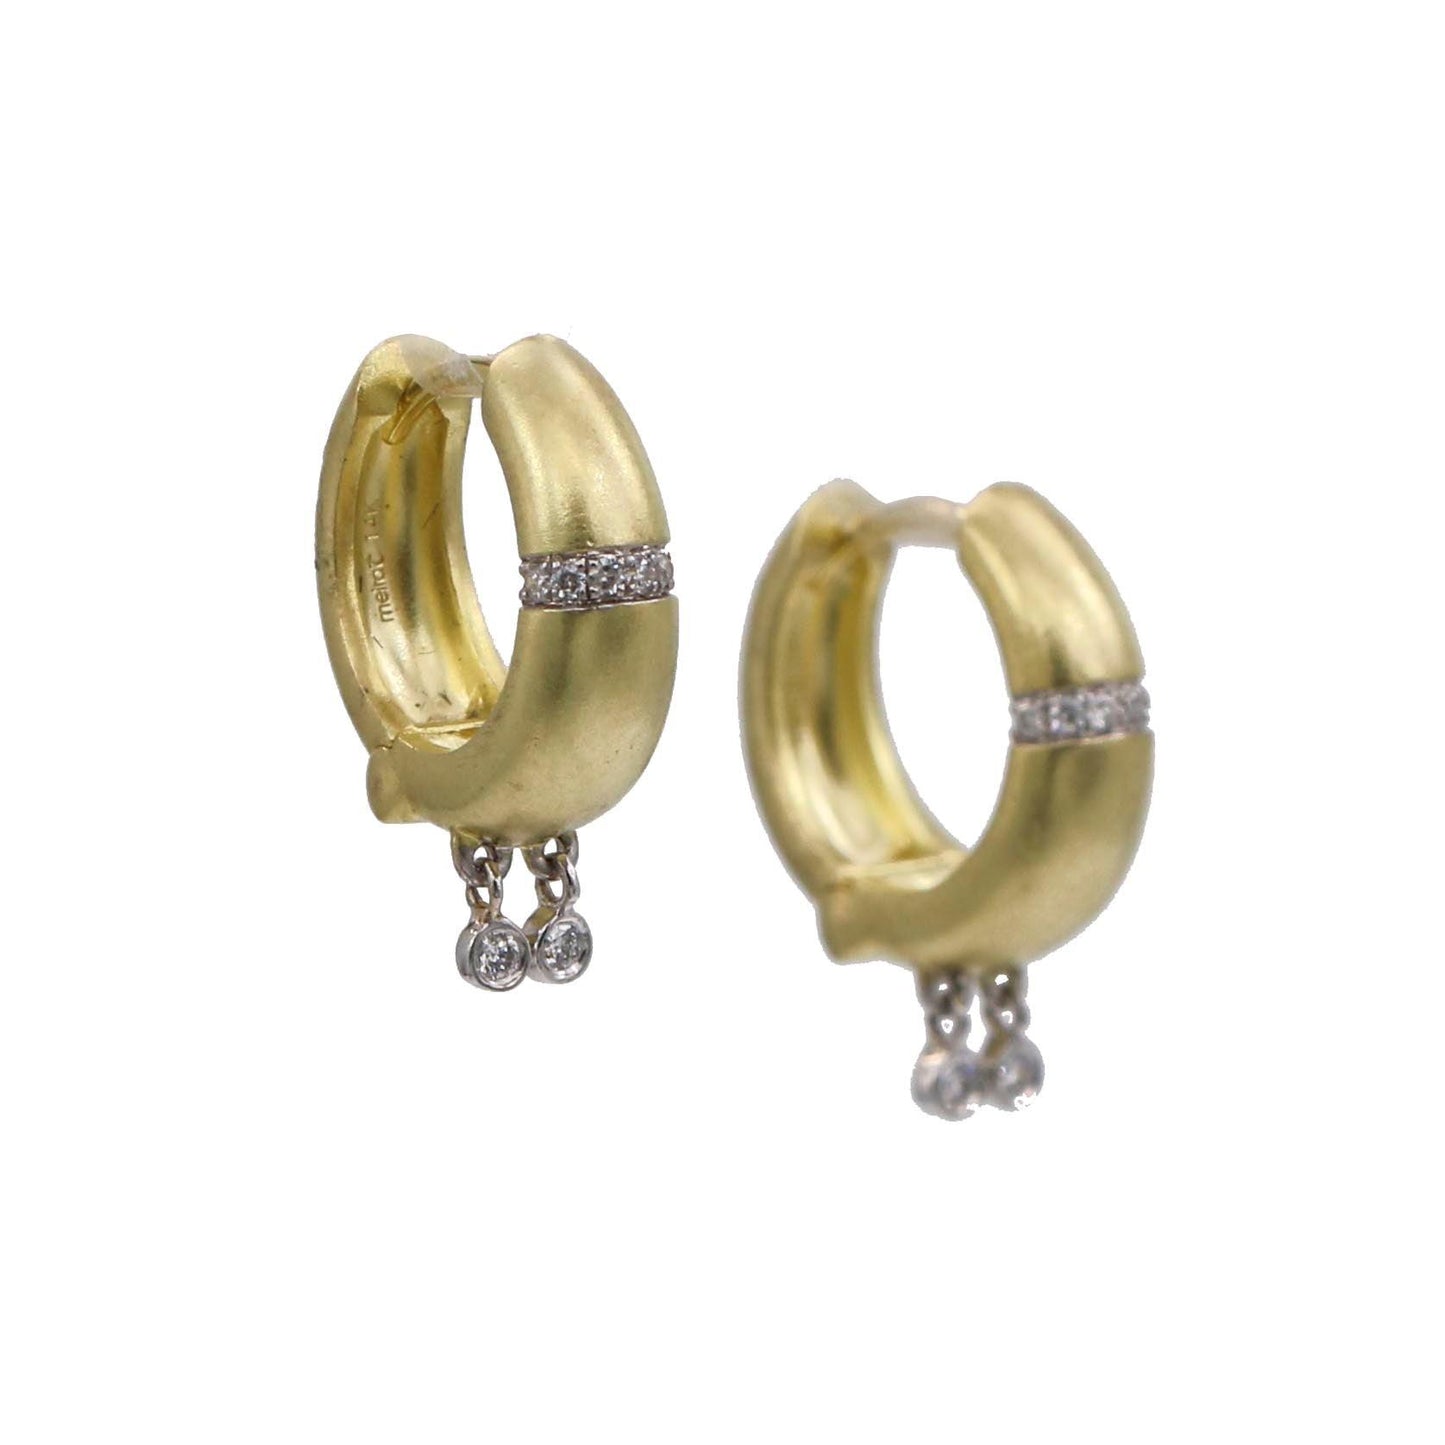 Meira T Small Hoop Earrings with Dangling Diamonds in 14k Yellow Gold - 31 Jewels Inc.